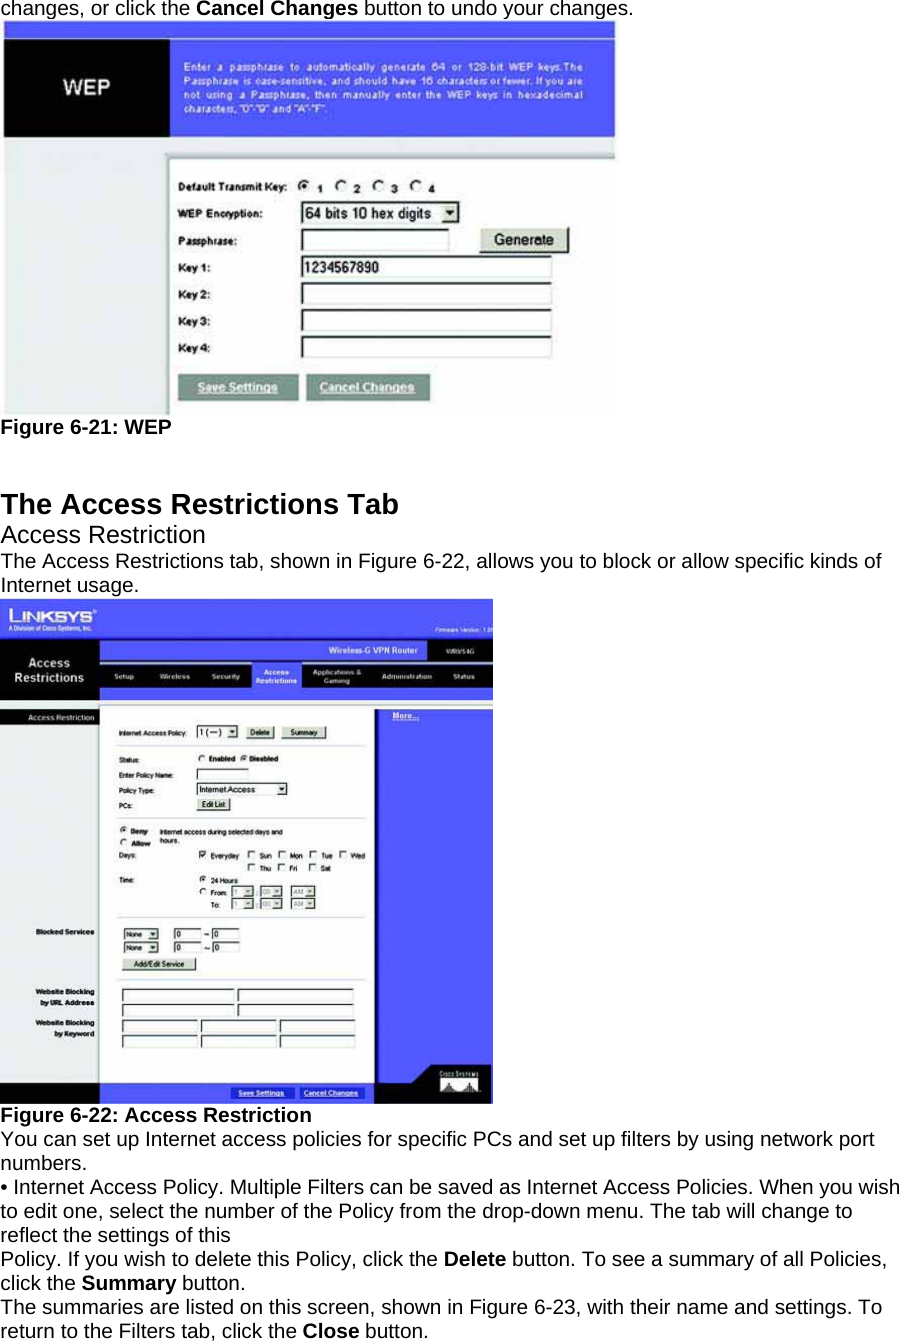 changes, or click the Cancel Changes button to undo your changes.  Figure 6-21: WEP   The Access Restrictions Tab Access Restriction The Access Restrictions tab, shown in Figure 6-22, allows you to block or allow specific kinds of Internet usage.  Figure 6-22: Access Restriction You can set up Internet access policies for specific PCs and set up filters by using network port numbers. • Internet Access Policy. Multiple Filters can be saved as Internet Access Policies. When you wish to edit one, select the number of the Policy from the drop-down menu. The tab will change to reflect the settings of this Policy. If you wish to delete this Policy, click the Delete button. To see a summary of all Policies, click the Summary button. The summaries are listed on this screen, shown in Figure 6-23, with their name and settings. To return to the Filters tab, click the Close button. 